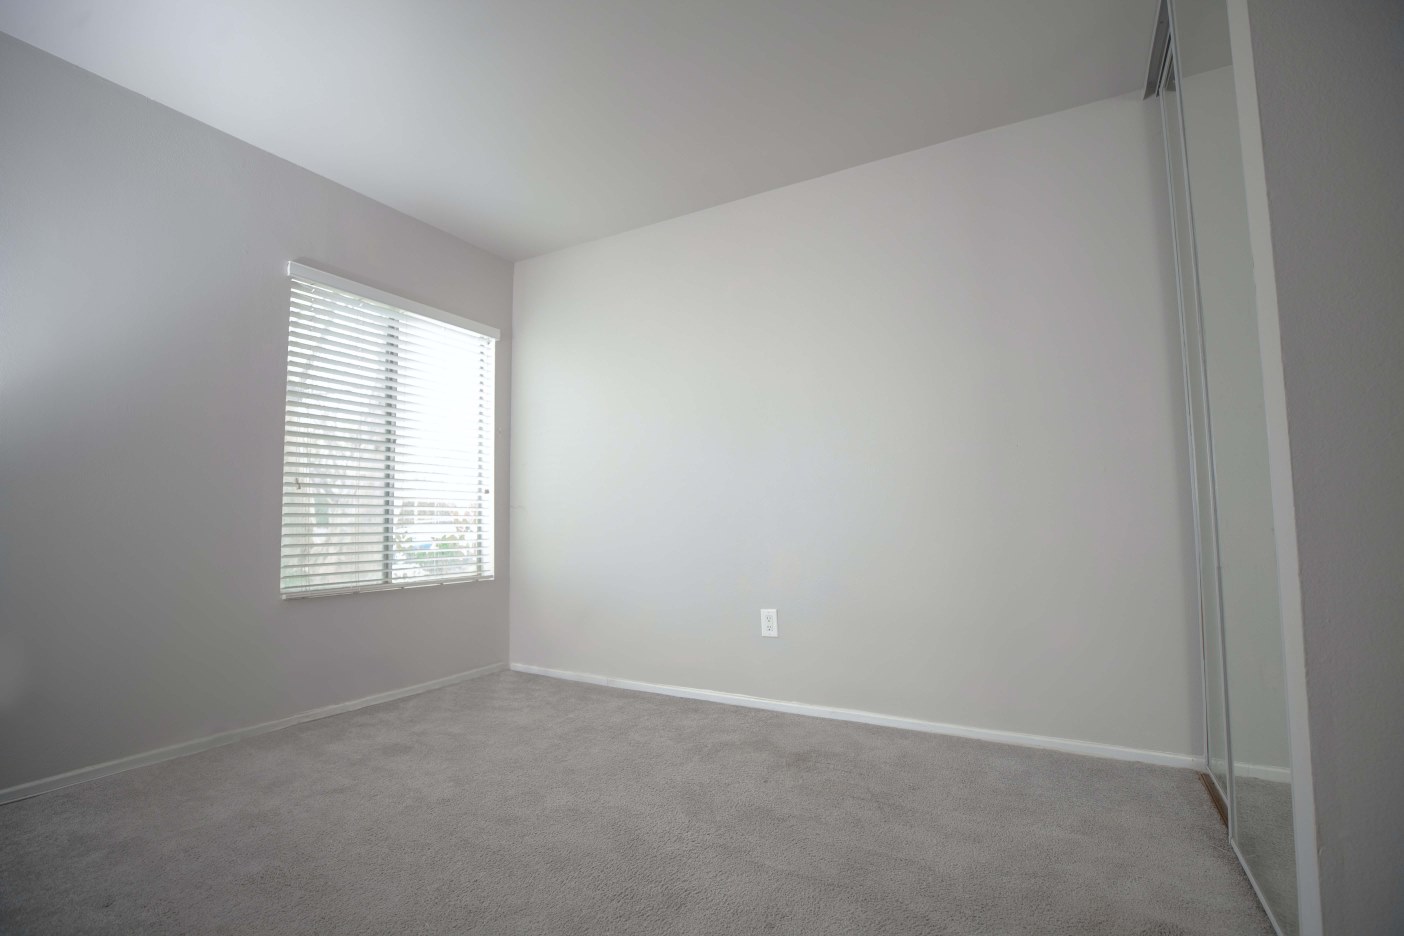 Image of an empty interior room inside a house.